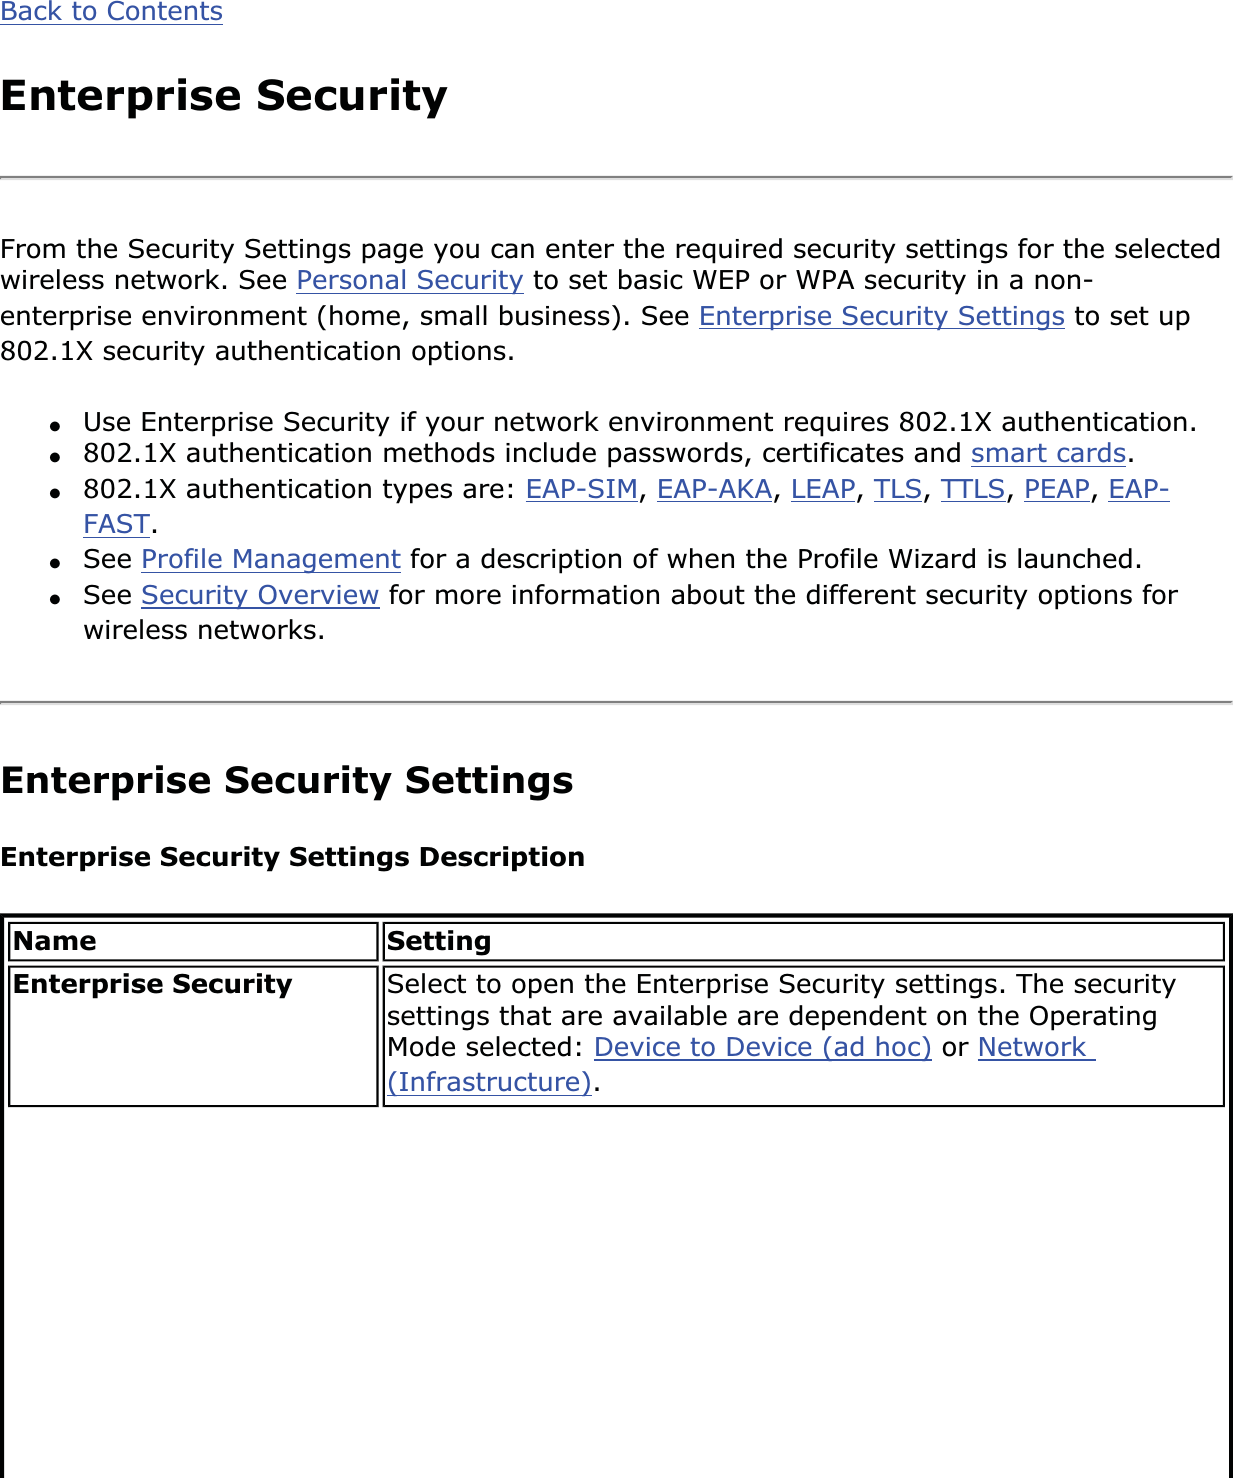 Back to ContentsEnterprise SecurityFrom the Security Settings page you can enter the required security settings for the selected wireless network. See Personal Security to set basic WEP or WPA security in a non-enterprise environment (home, small business). See Enterprise Security Settings to set up 802.1X security authentication options.●Use Enterprise Security if your network environment requires 802.1X authentication.●802.1X authentication methods include passwords, certificates and smart cards.●802.1X authentication types are: EAP-SIM,EAP-AKA,LEAP,TLS,TTLS,PEAP,EAP-FAST.●See Profile Management for a description of when the Profile Wizard is launched.●See Security Overview for more information about the different security options for wireless networks.Enterprise Security Settings Enterprise Security Settings Description Name SettingEnterprise Security  Select to open the Enterprise Security settings. The security settings that are available are dependent on the Operating Mode selected: Device to Device (ad hoc) or Network(Infrastructure).